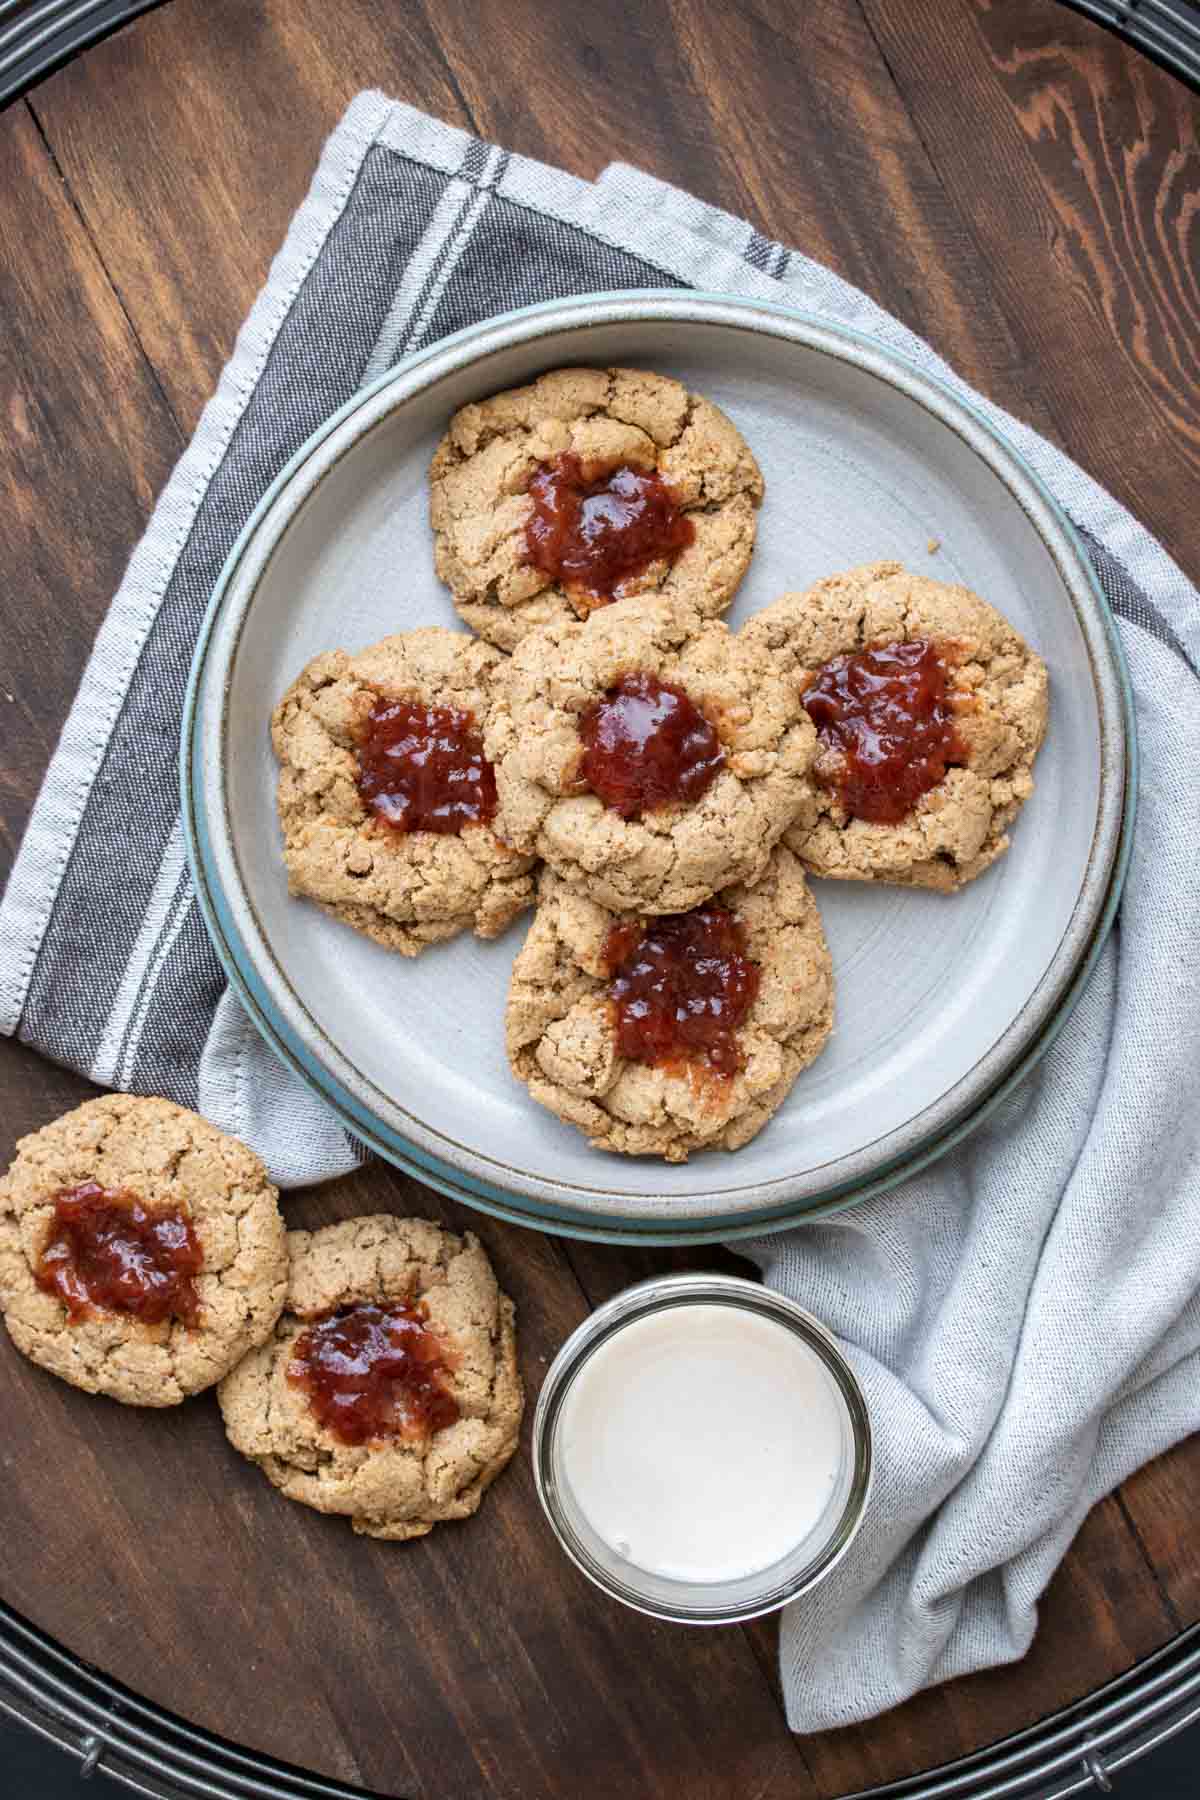 Thumbprint cookies with berry jam on a grey plate on a wooden surface